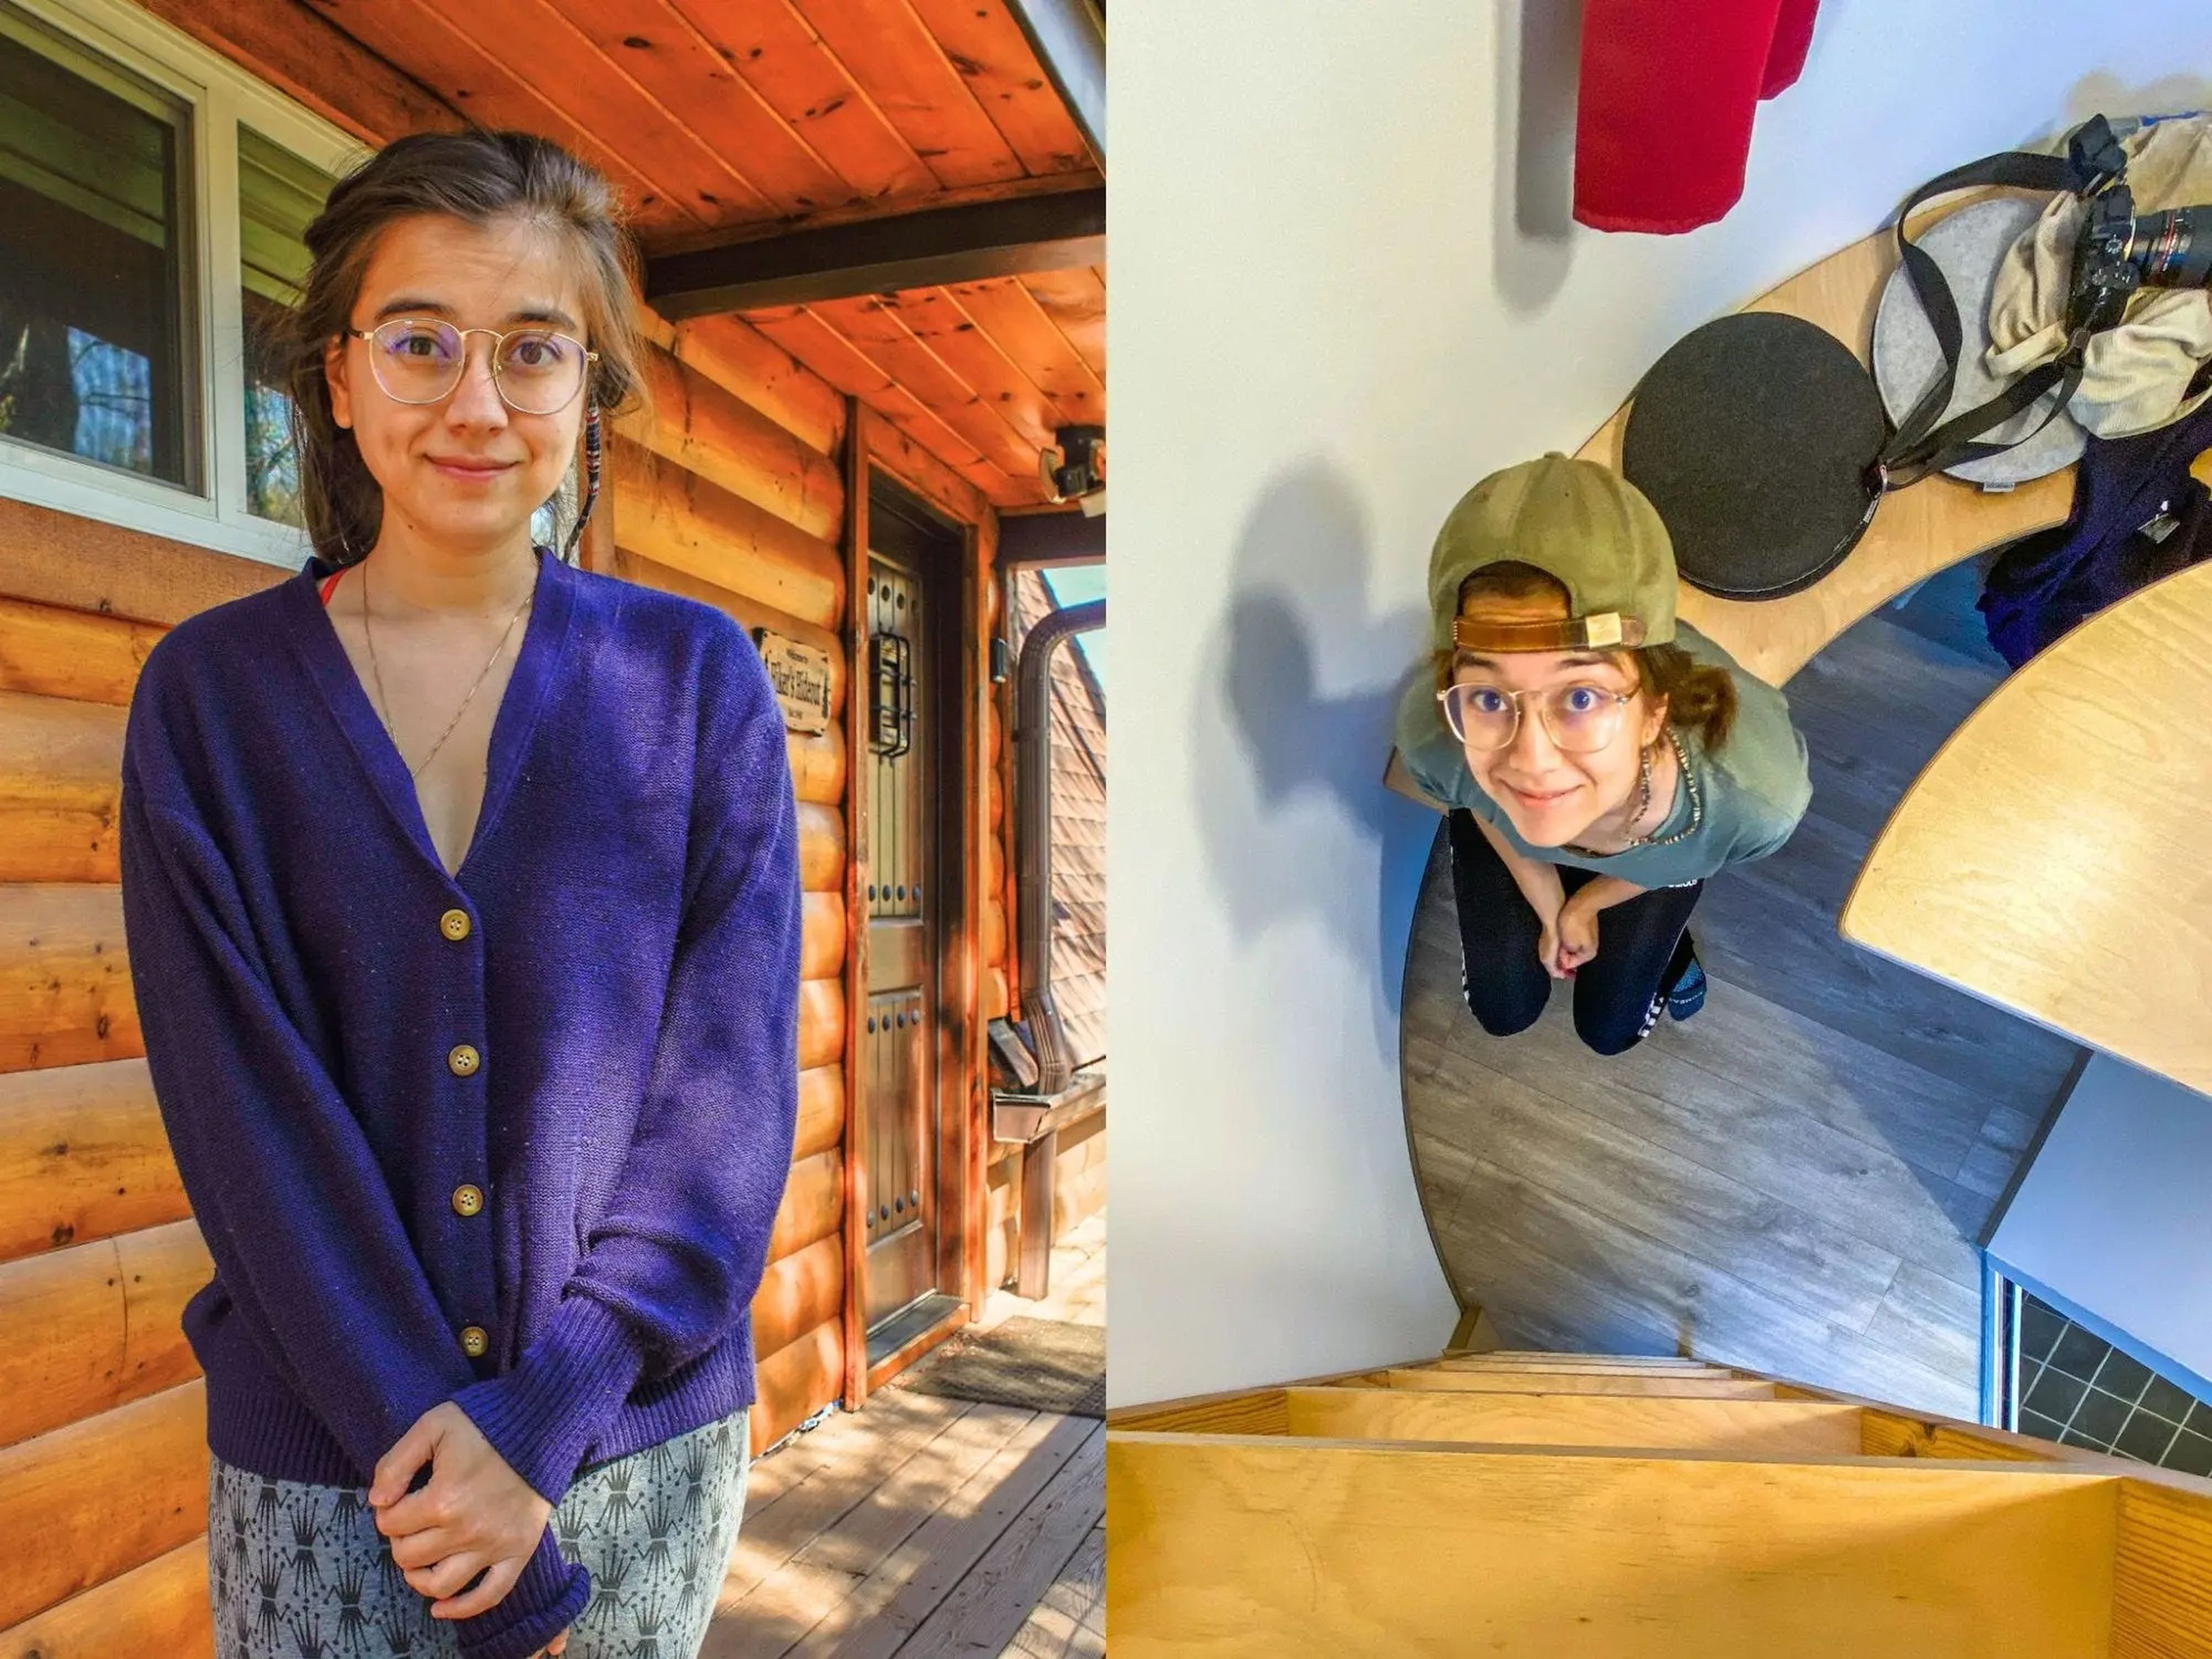 Left: The author in a navy sweater stands in front of a brown, wooden cabin. Right: The author looks up at a camera while sitting inside a tiny Airbnb with gray wood floors.